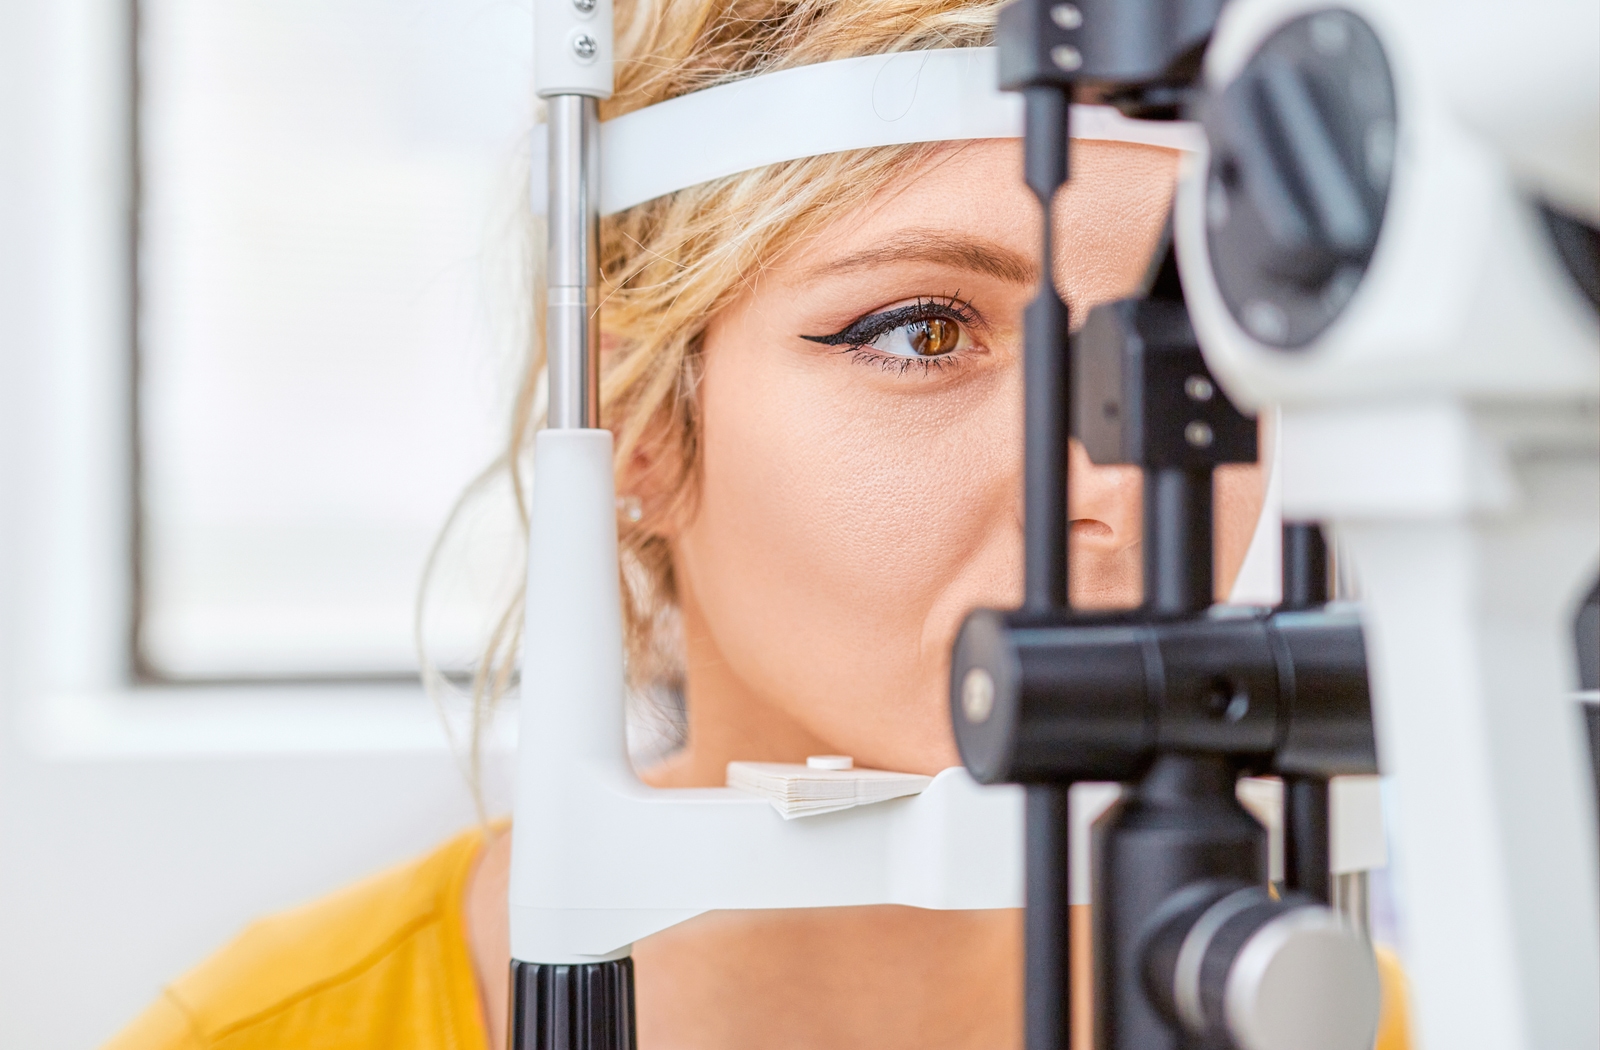 A woman at her optometrist undergoing a slit lamp test to check her vision at her regular eye exam